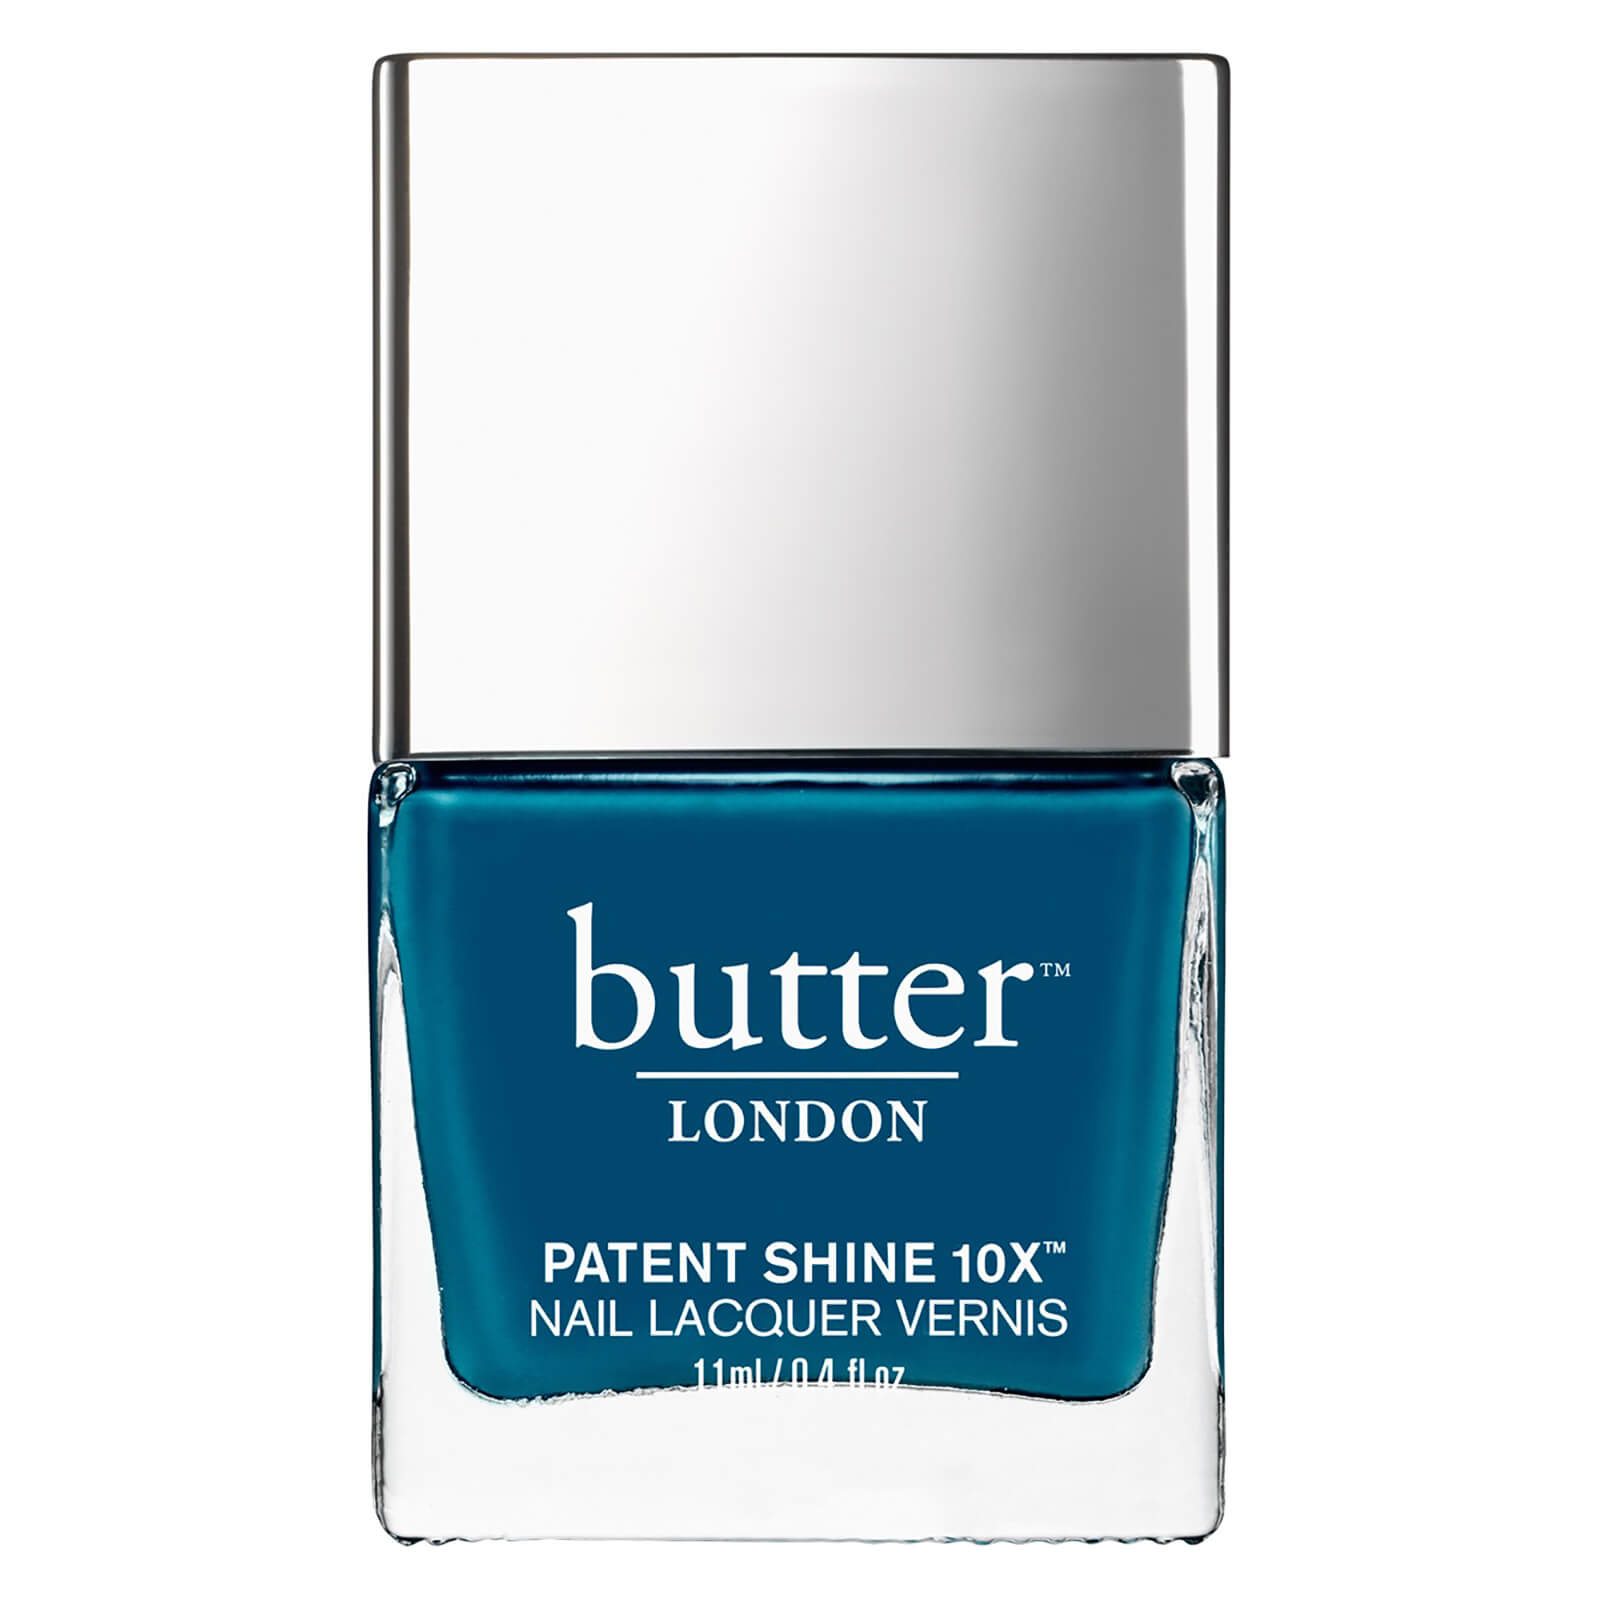 butter LONDON Patent Shine 10X Nail Lacquer 11ml - Chat Up